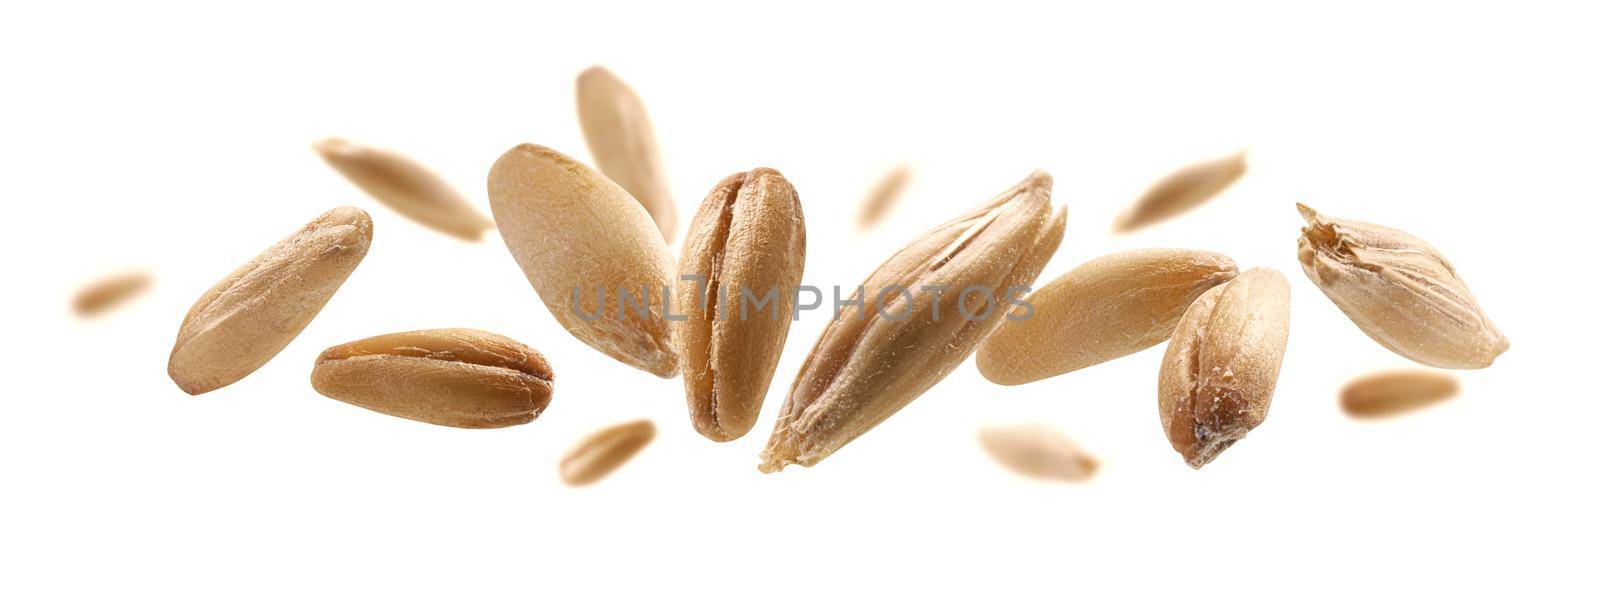 Oat grains levitate on a white background by butenkow